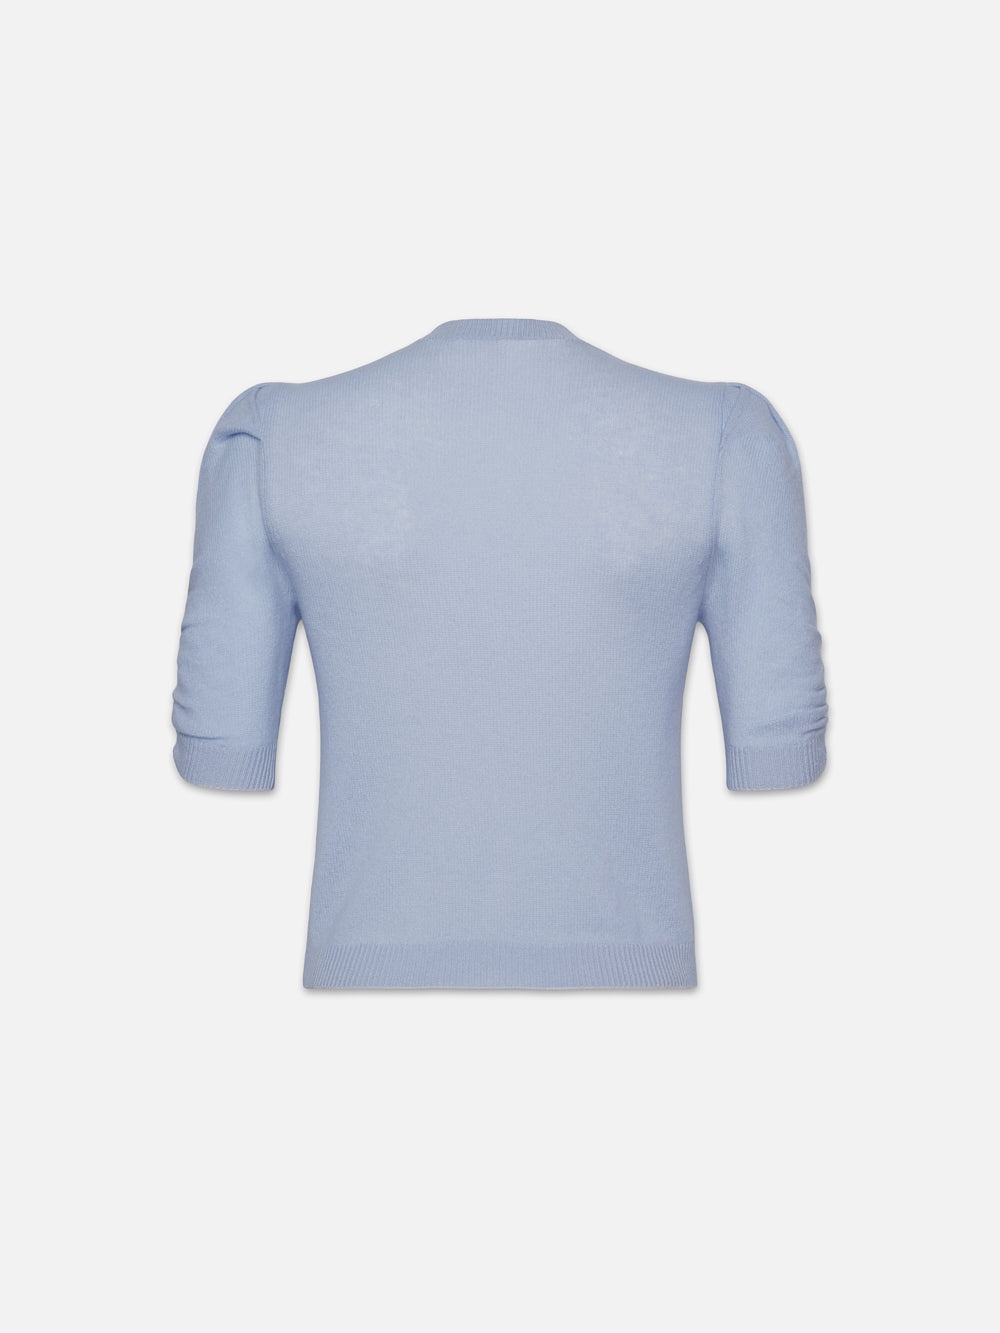 Ruched Sleeve Cashmere Sweater in Light Blue - 4